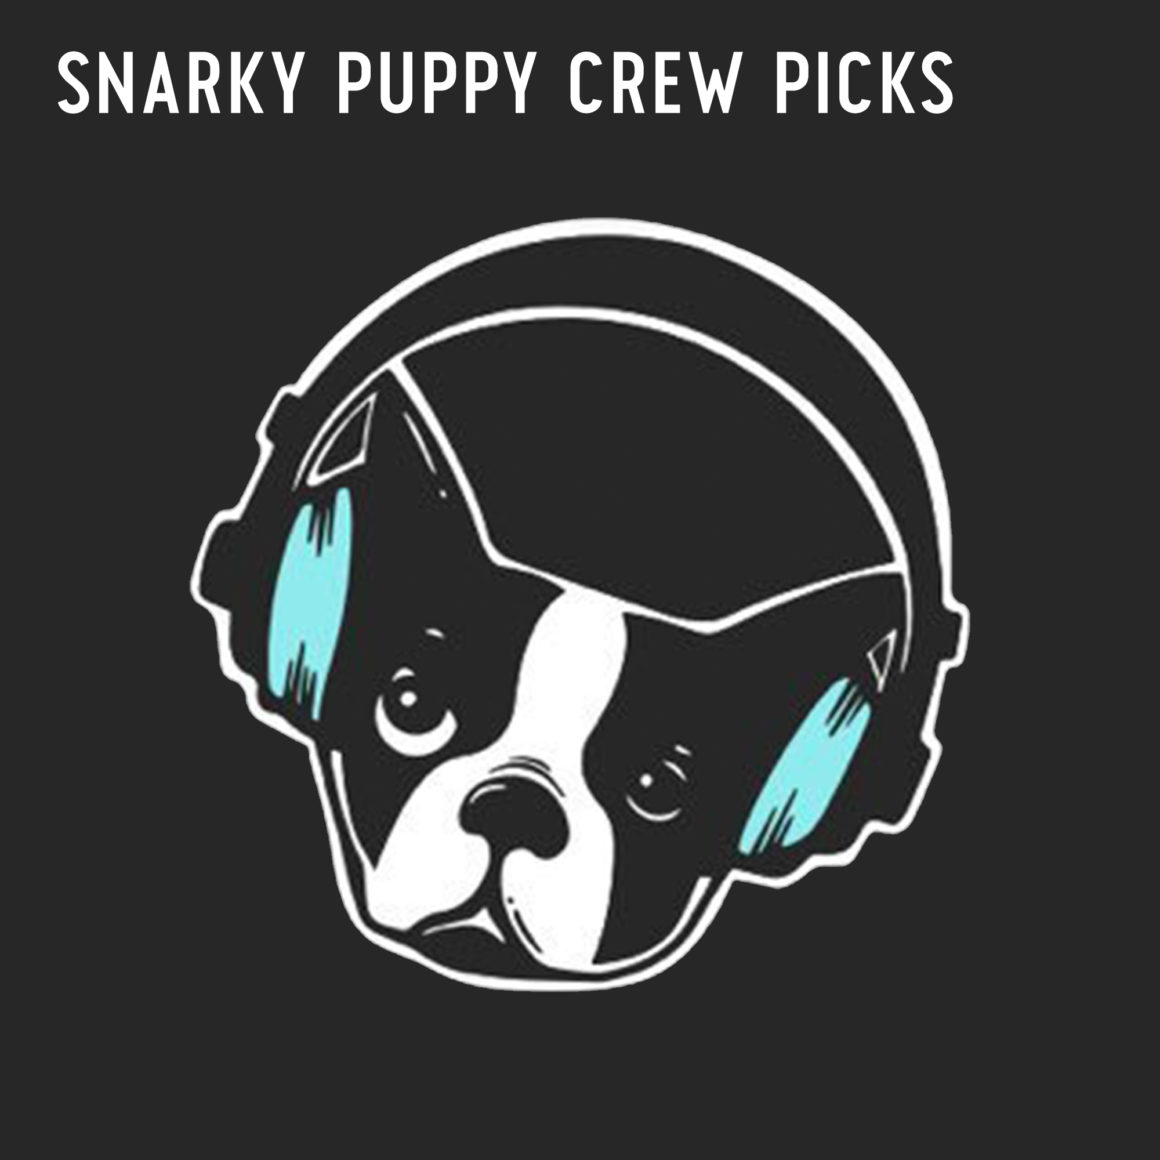 Interview With Snarky Puppy Crew Members, Matthew Recchia and Felicity Hall